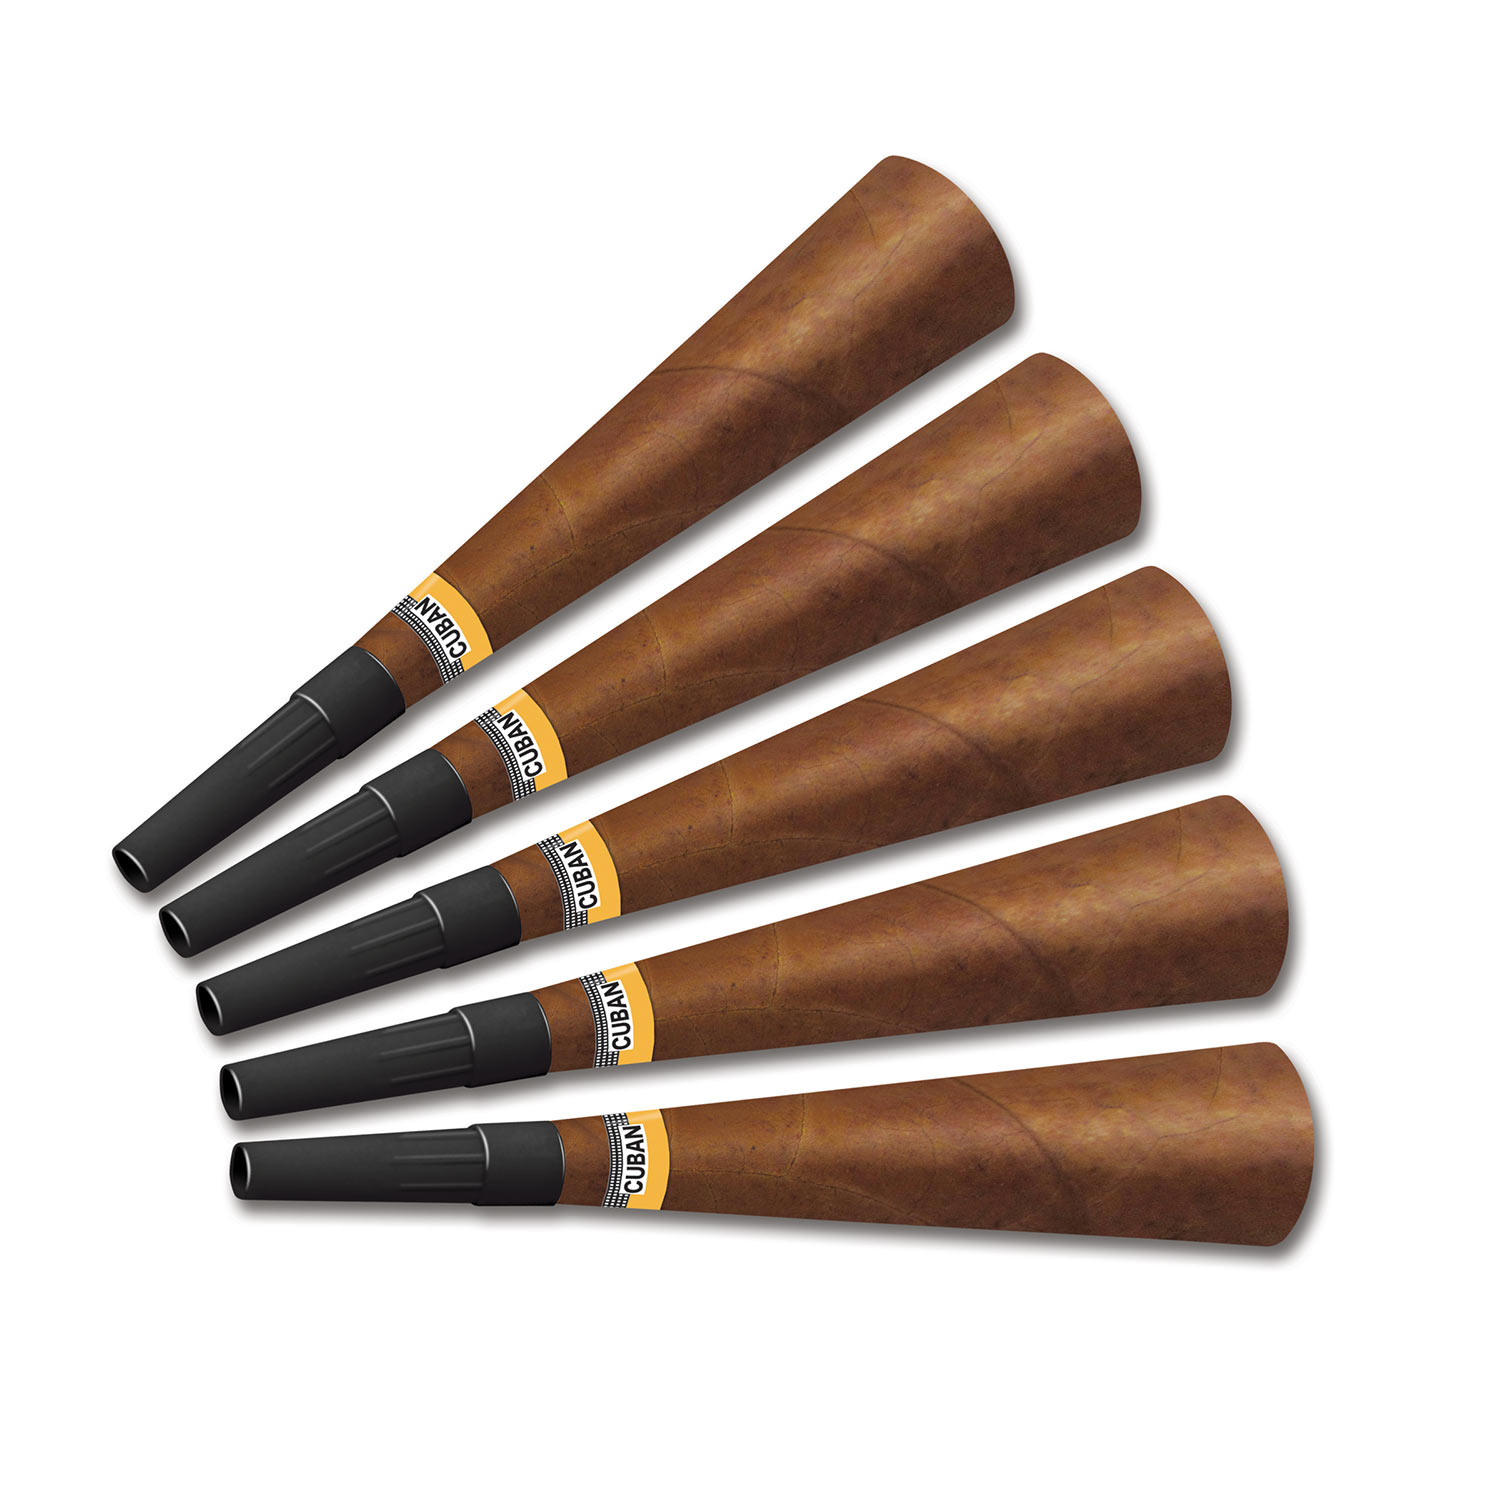 Party cigar horns that are designed to replicate a traditional cigar.